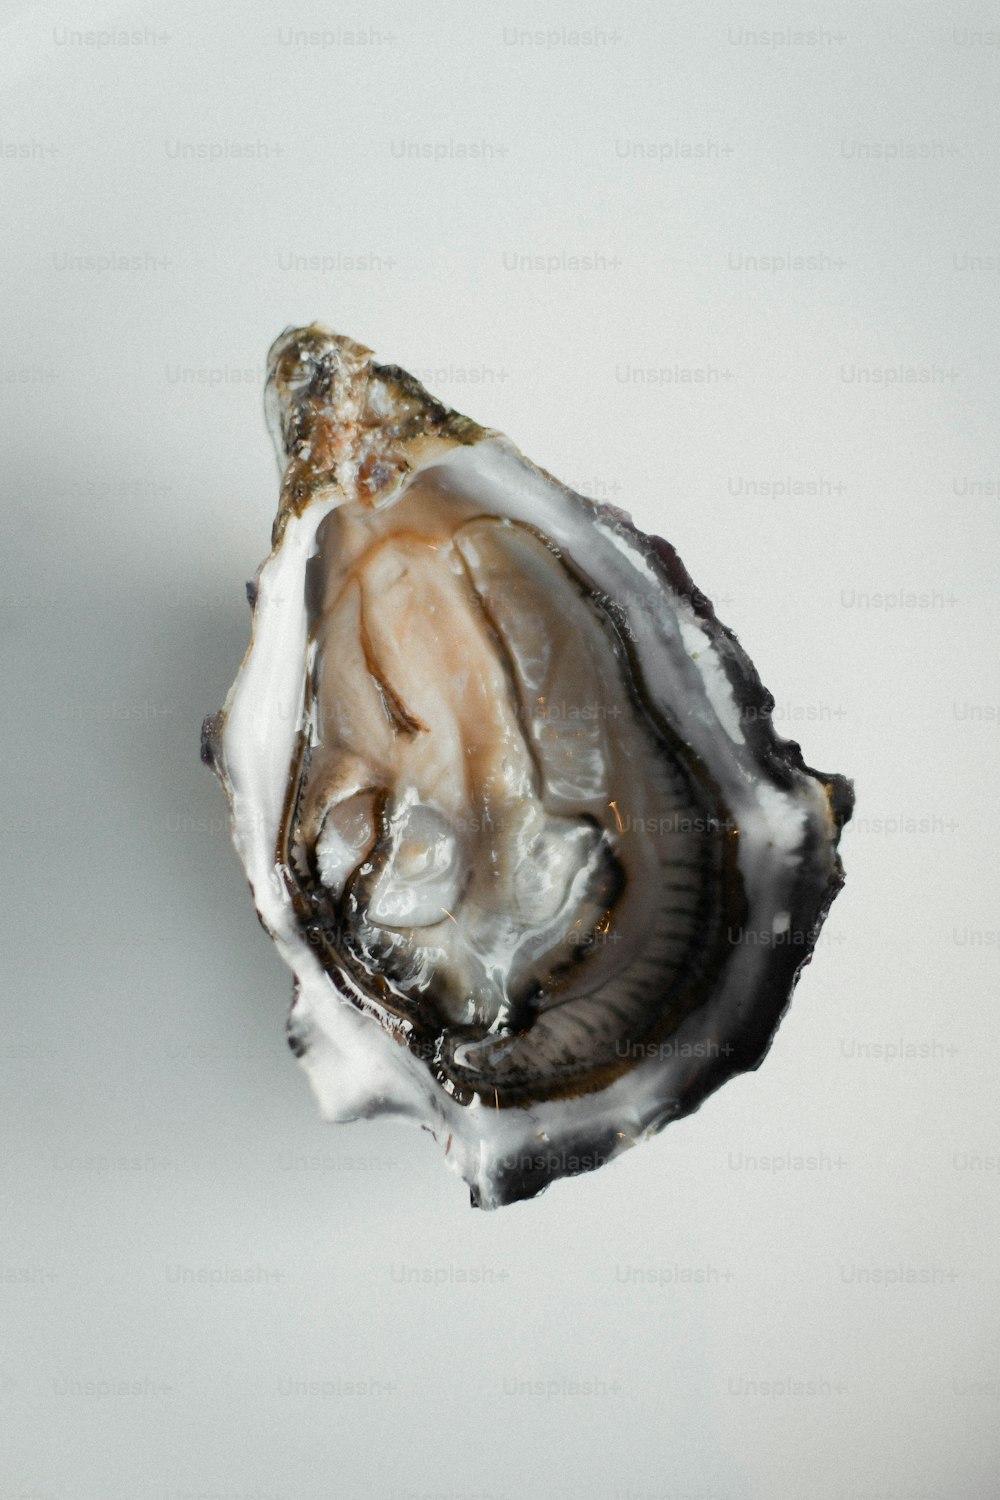 a half eaten oyster on a white surface